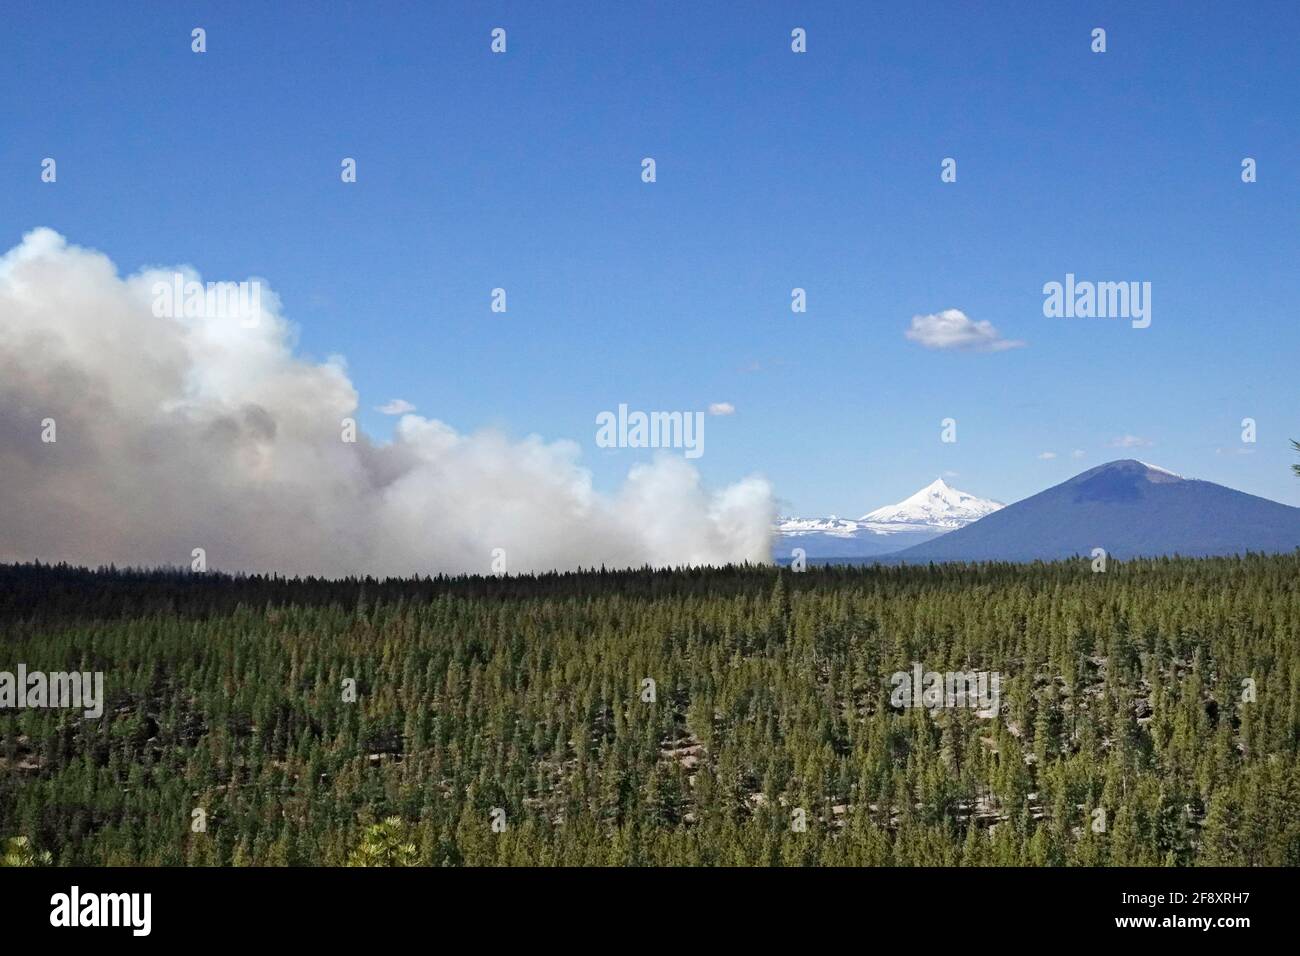 A massive controlled, or prescribed burn (proscribed), in the Deschutes National Forest near the town of Sisters, Oregon, burns underbrush and other f Stock Photo